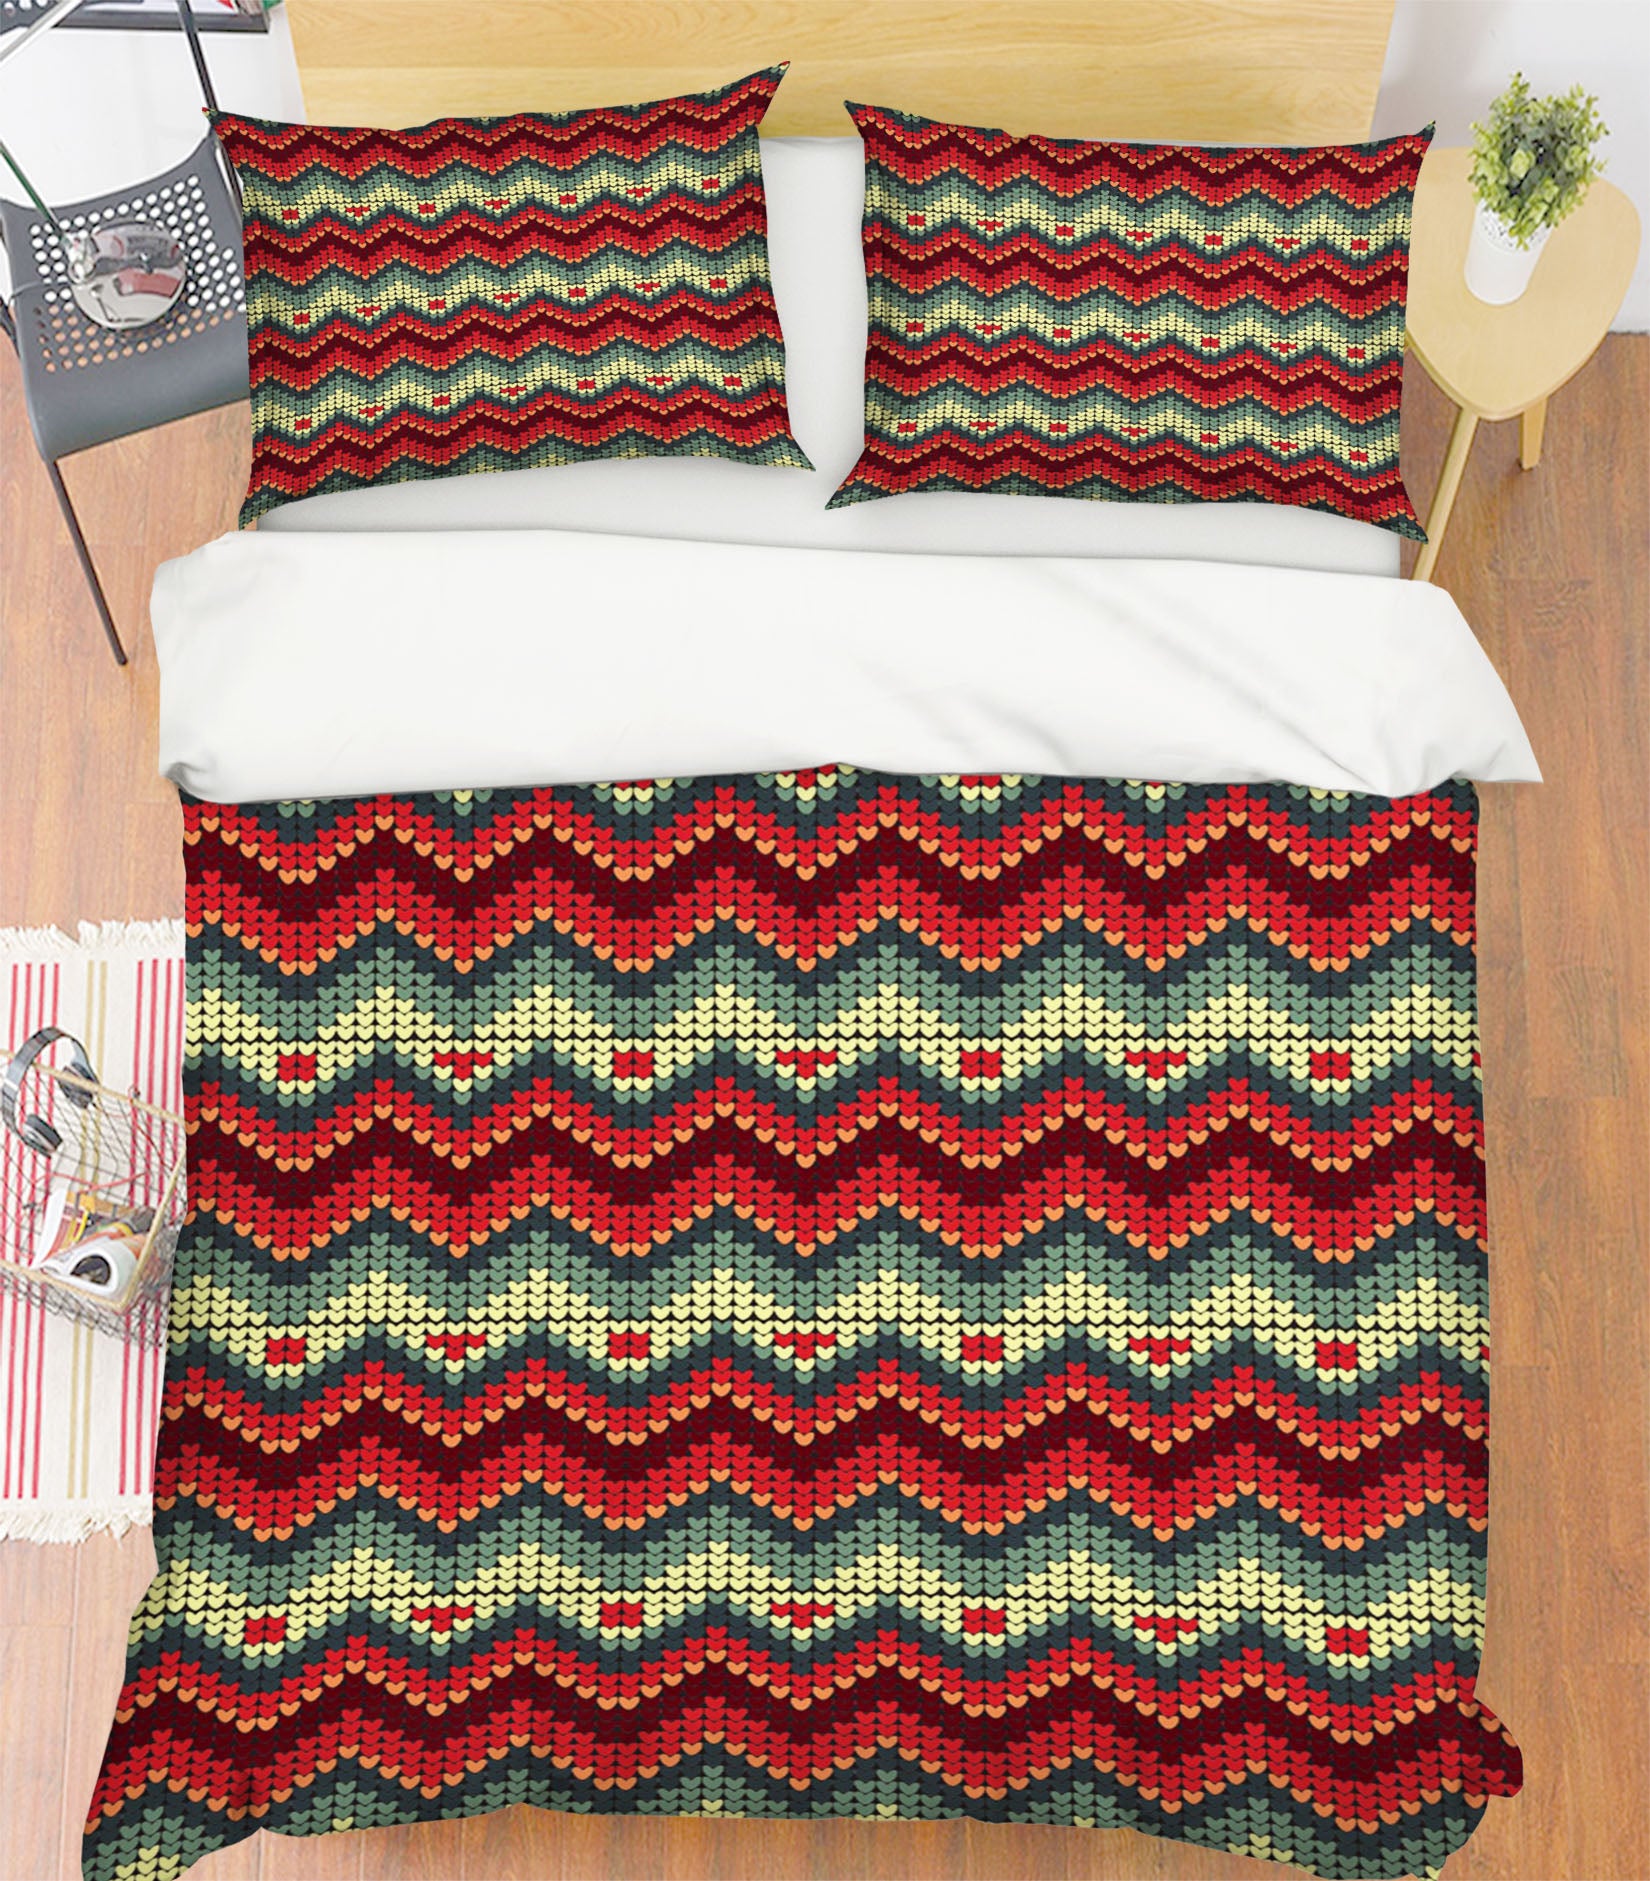 3D Wave Pattern 45017 Christmas Quilt Duvet Cover Xmas Bed Pillowcases